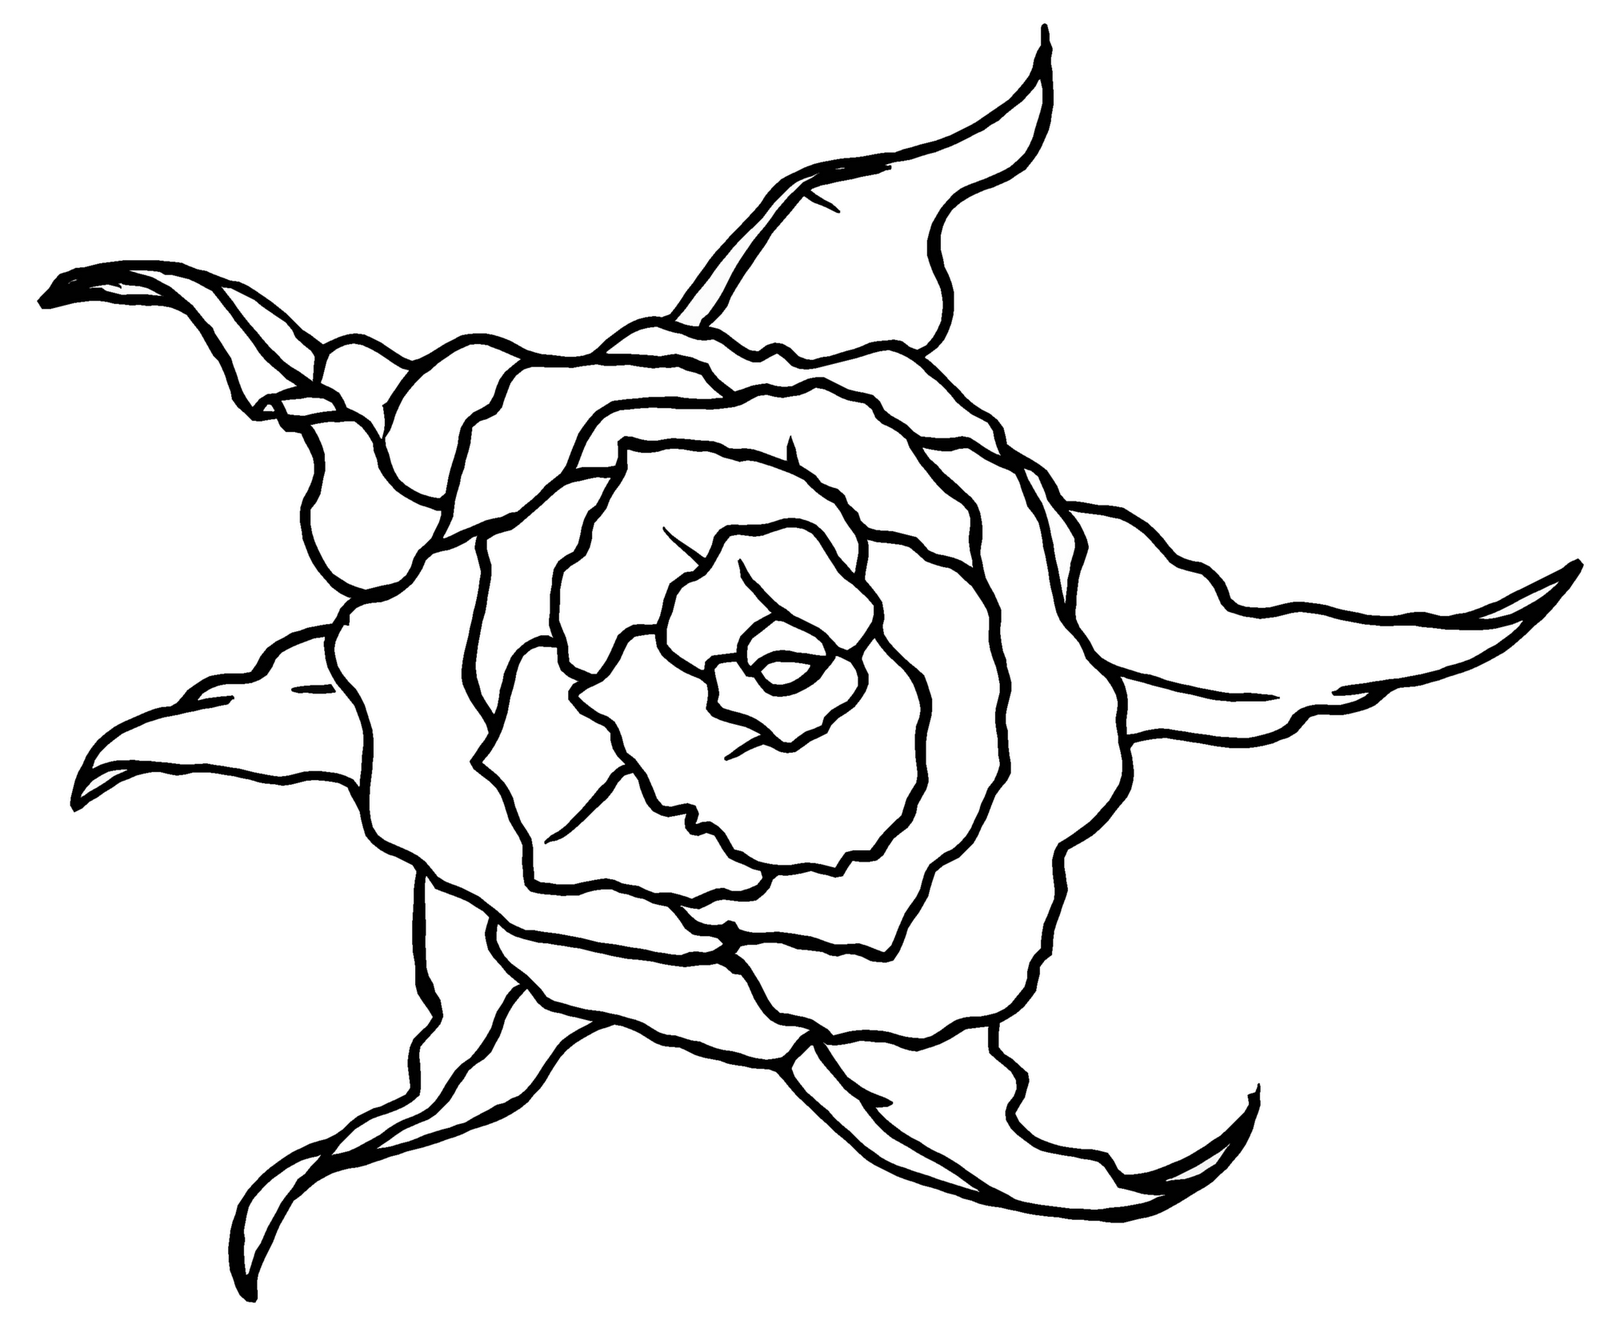 Rose Line Drawings - ClipArt Best